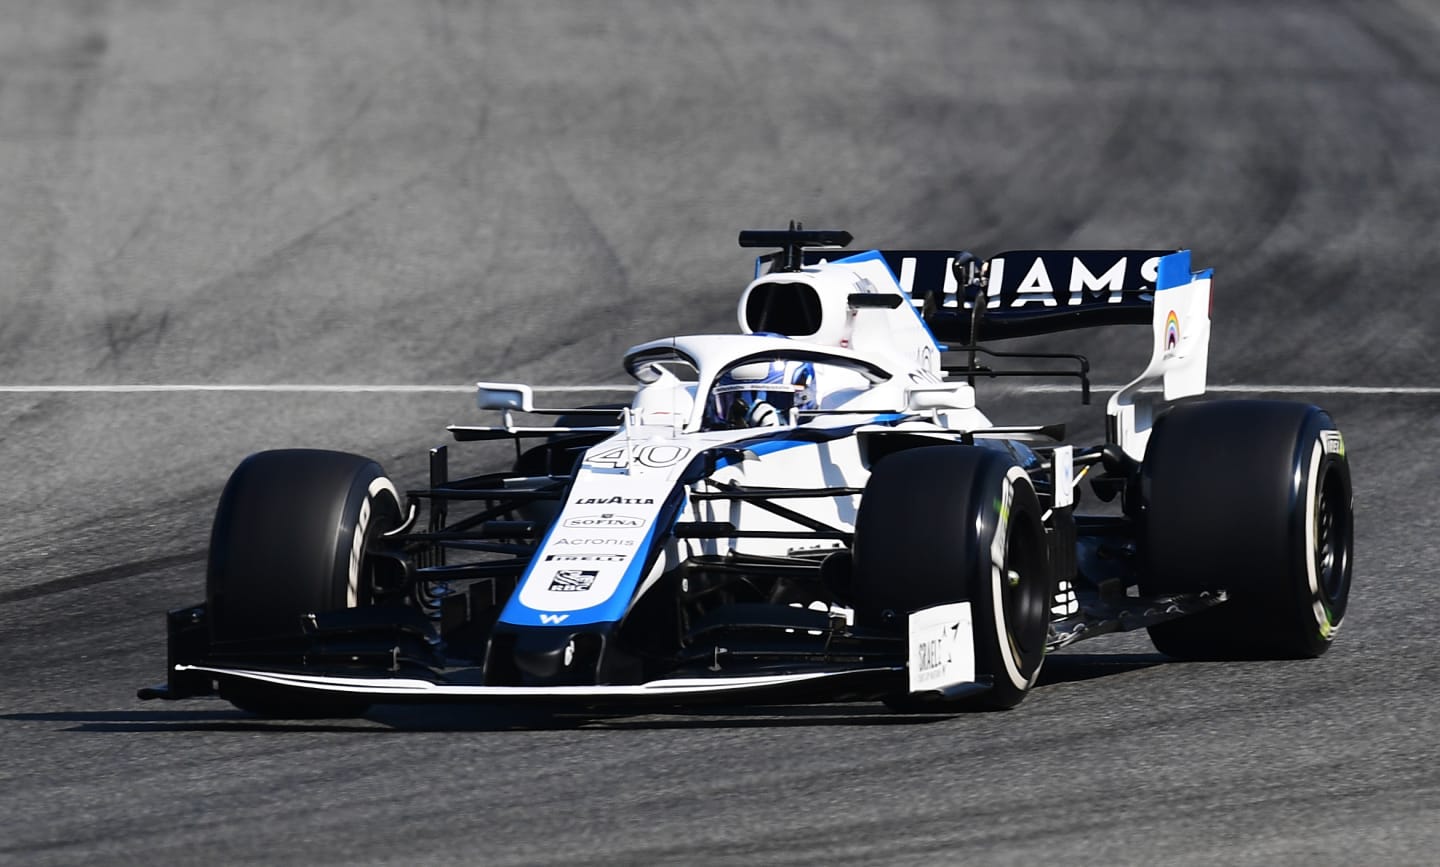 MONZA, ITALY - SEPTEMBER 04: George Russell of Great Britain driving the (63) Williams Racing FW43 Mercedes on track during practice for the F1 Grand Prix of Italy at Autodromo di Monza on September 04, 2020 in Monza, Italy. (Photo by Miguel Medina/Pool via Getty Images)